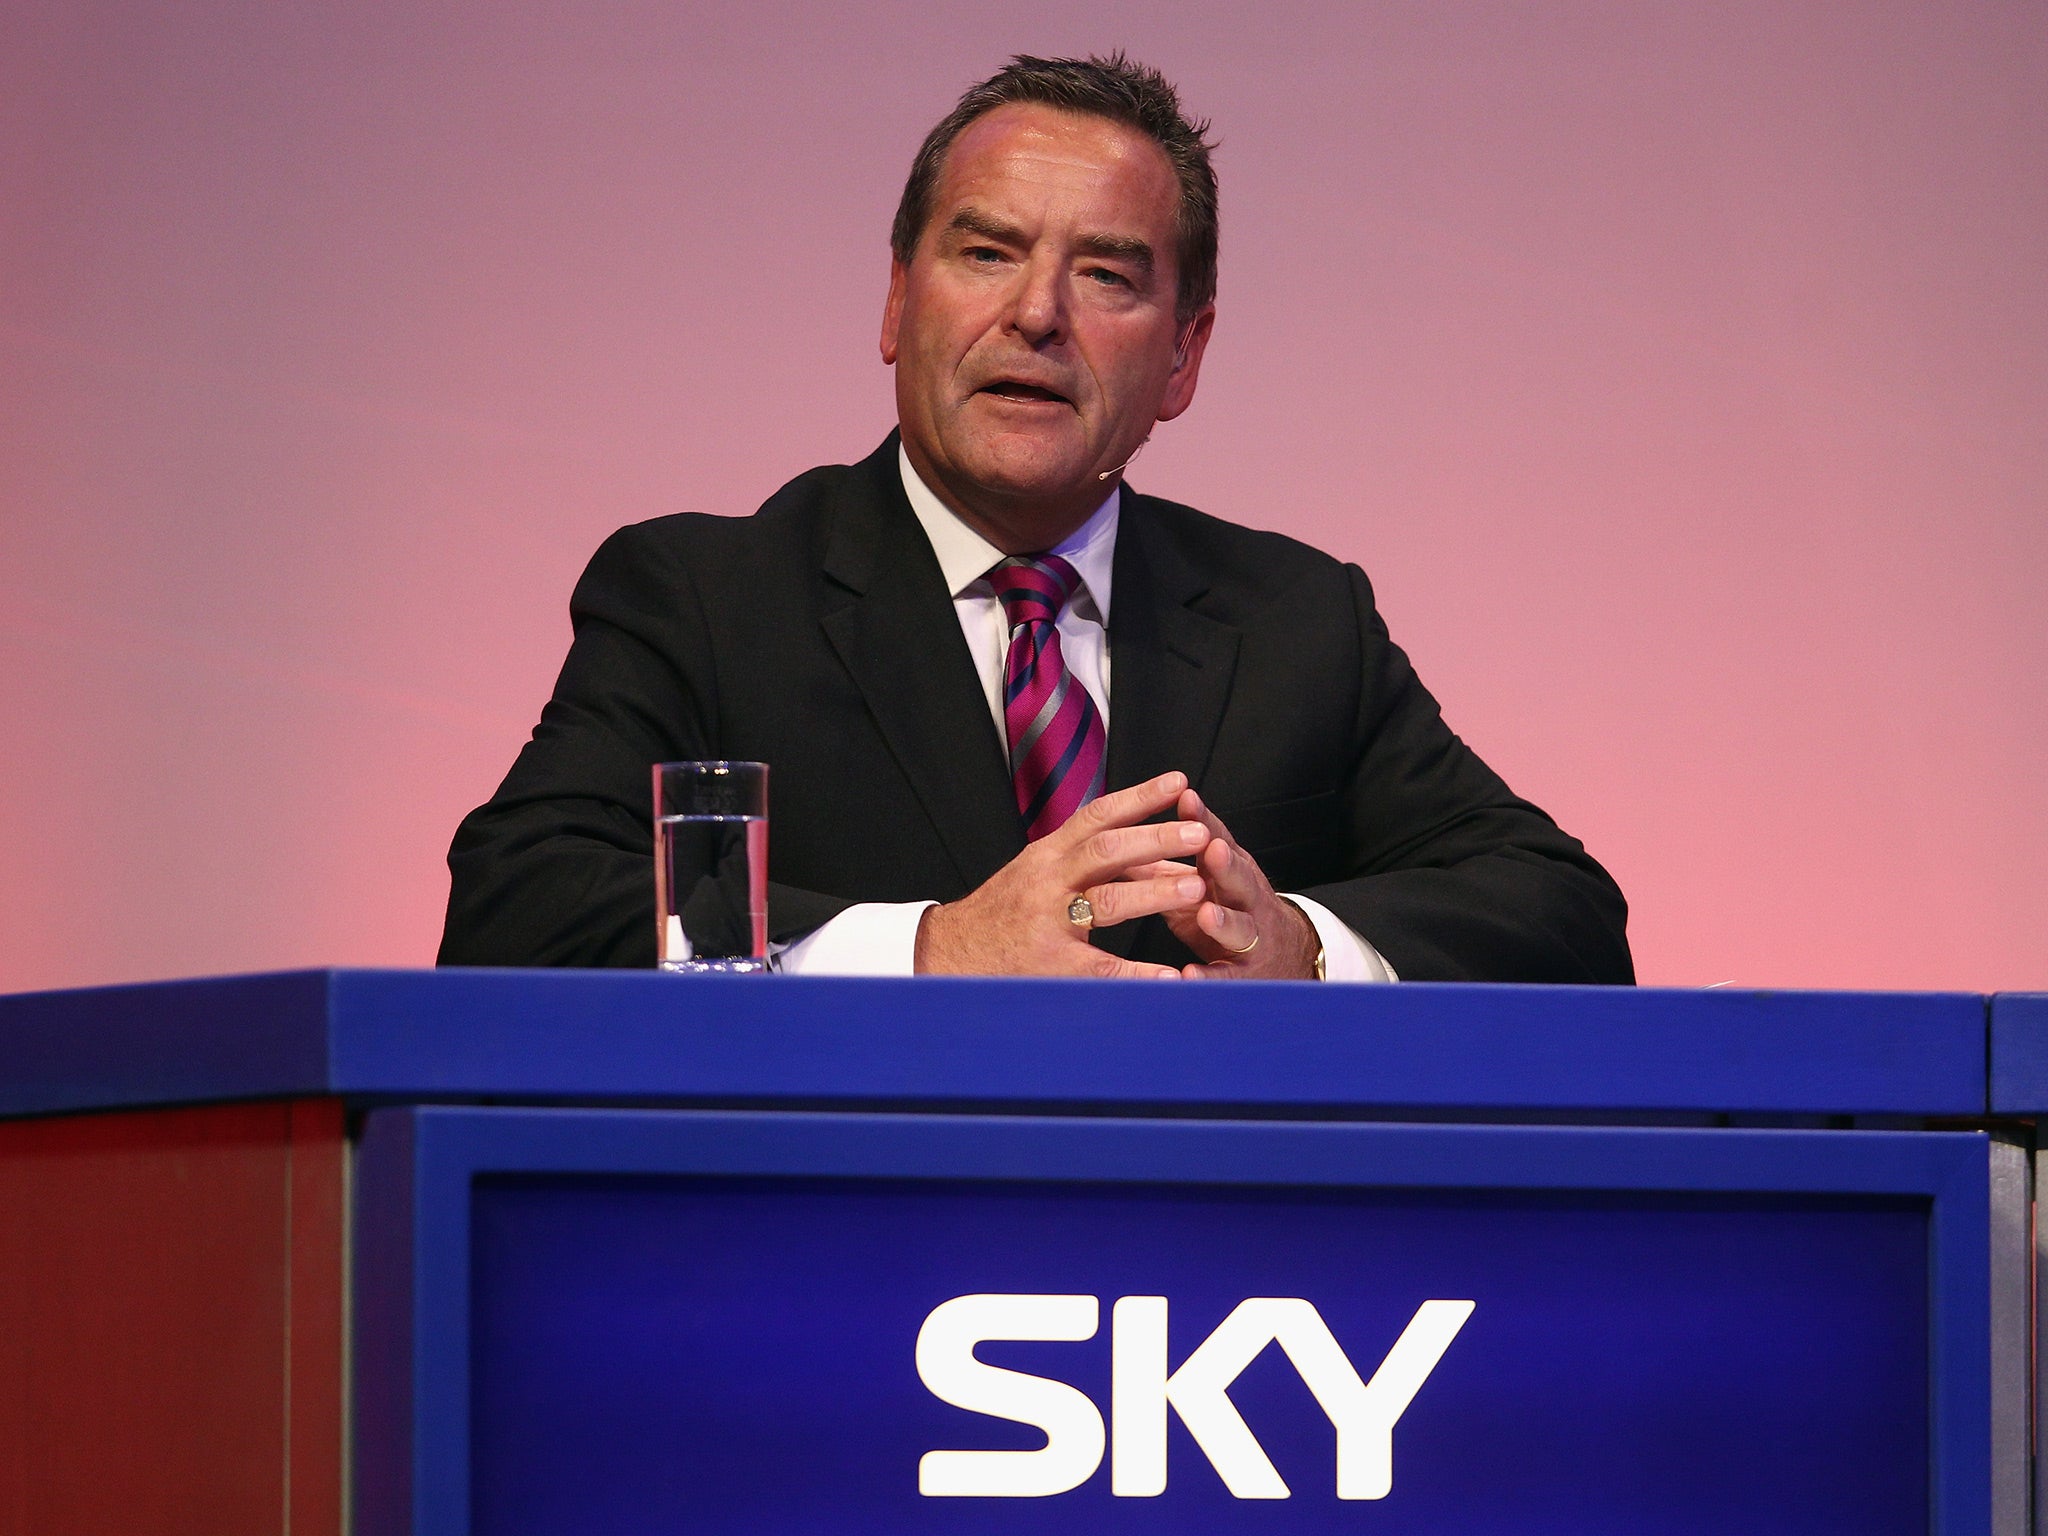 Jeff Stelling has presented Sky's Saturday results programme since 1994